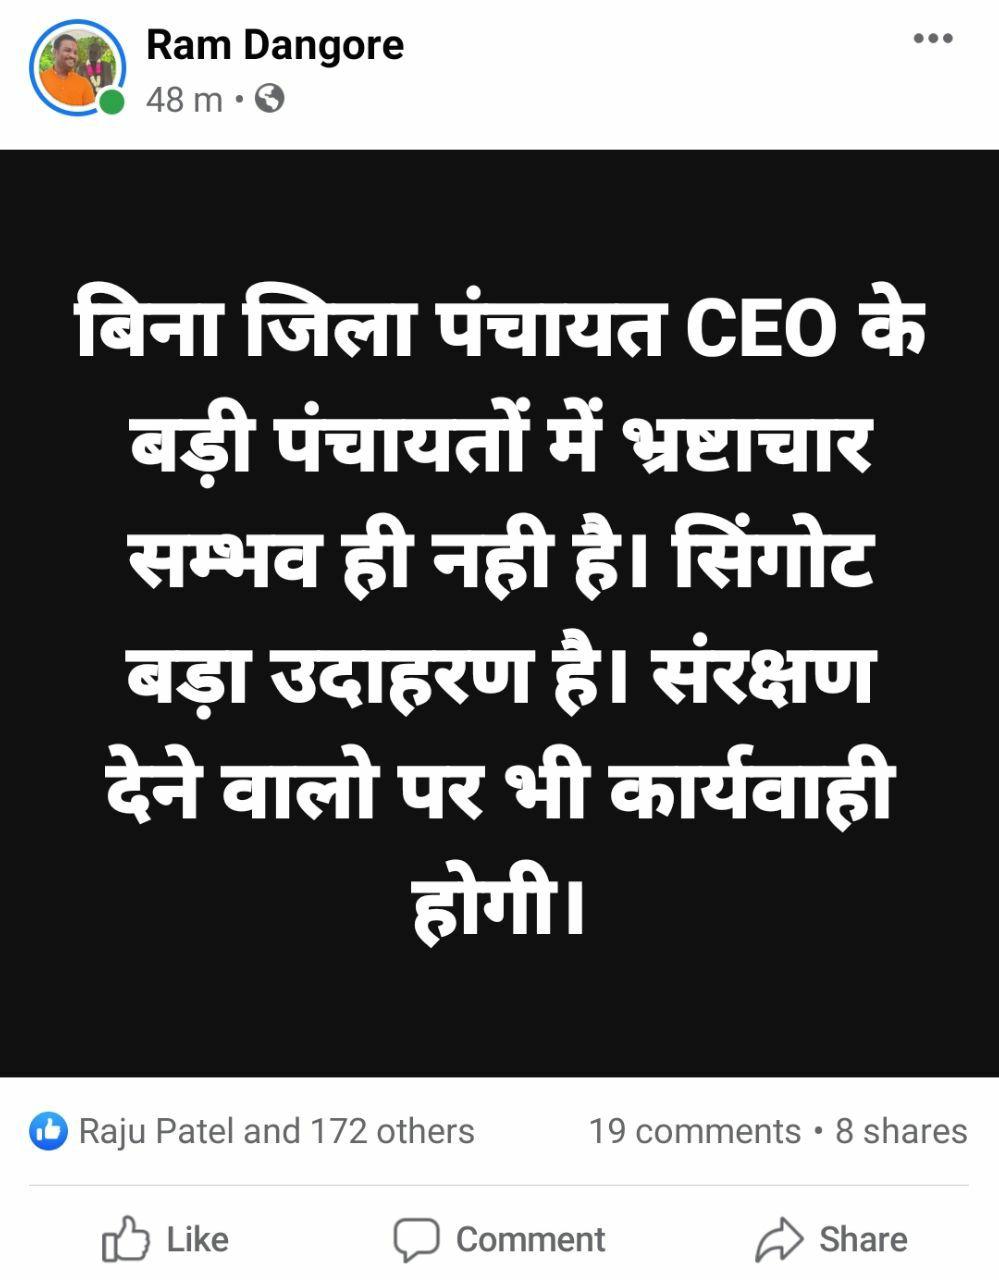 Pandhana MLA wrote about the ZP CEO on Facebook